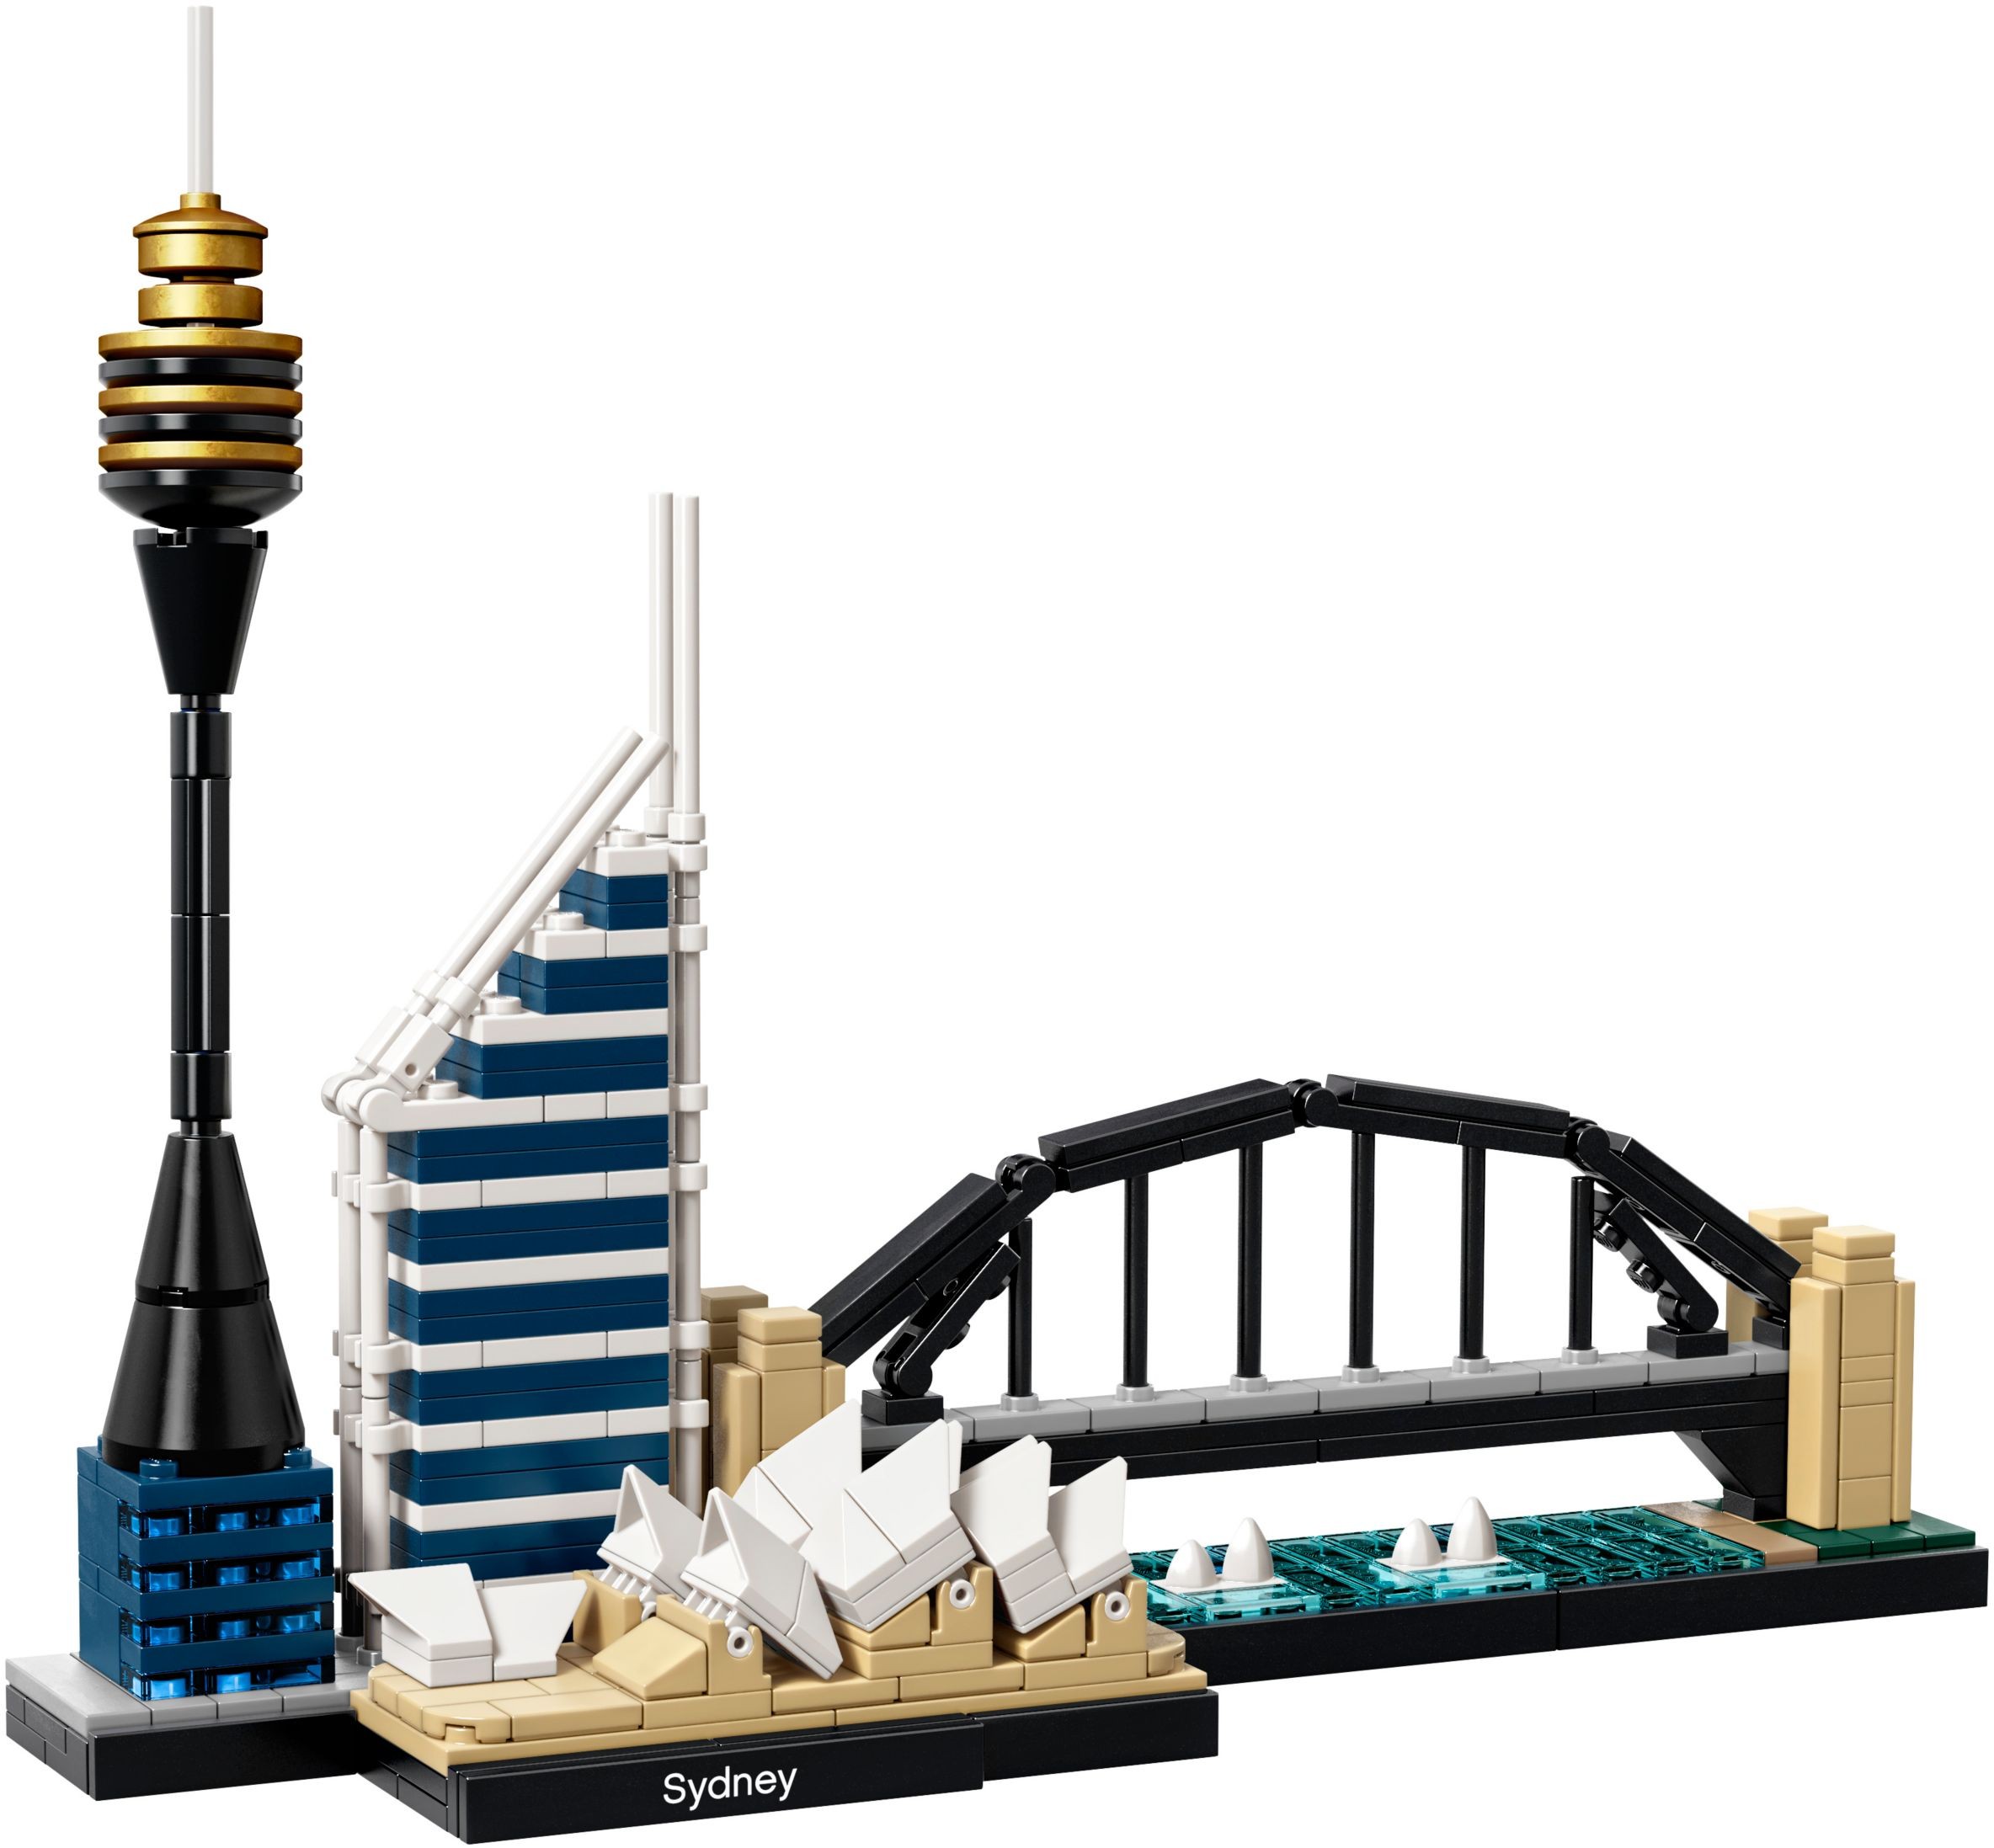 Ranking all 13 Lego Architecture Skylines from 2016 to 2022 